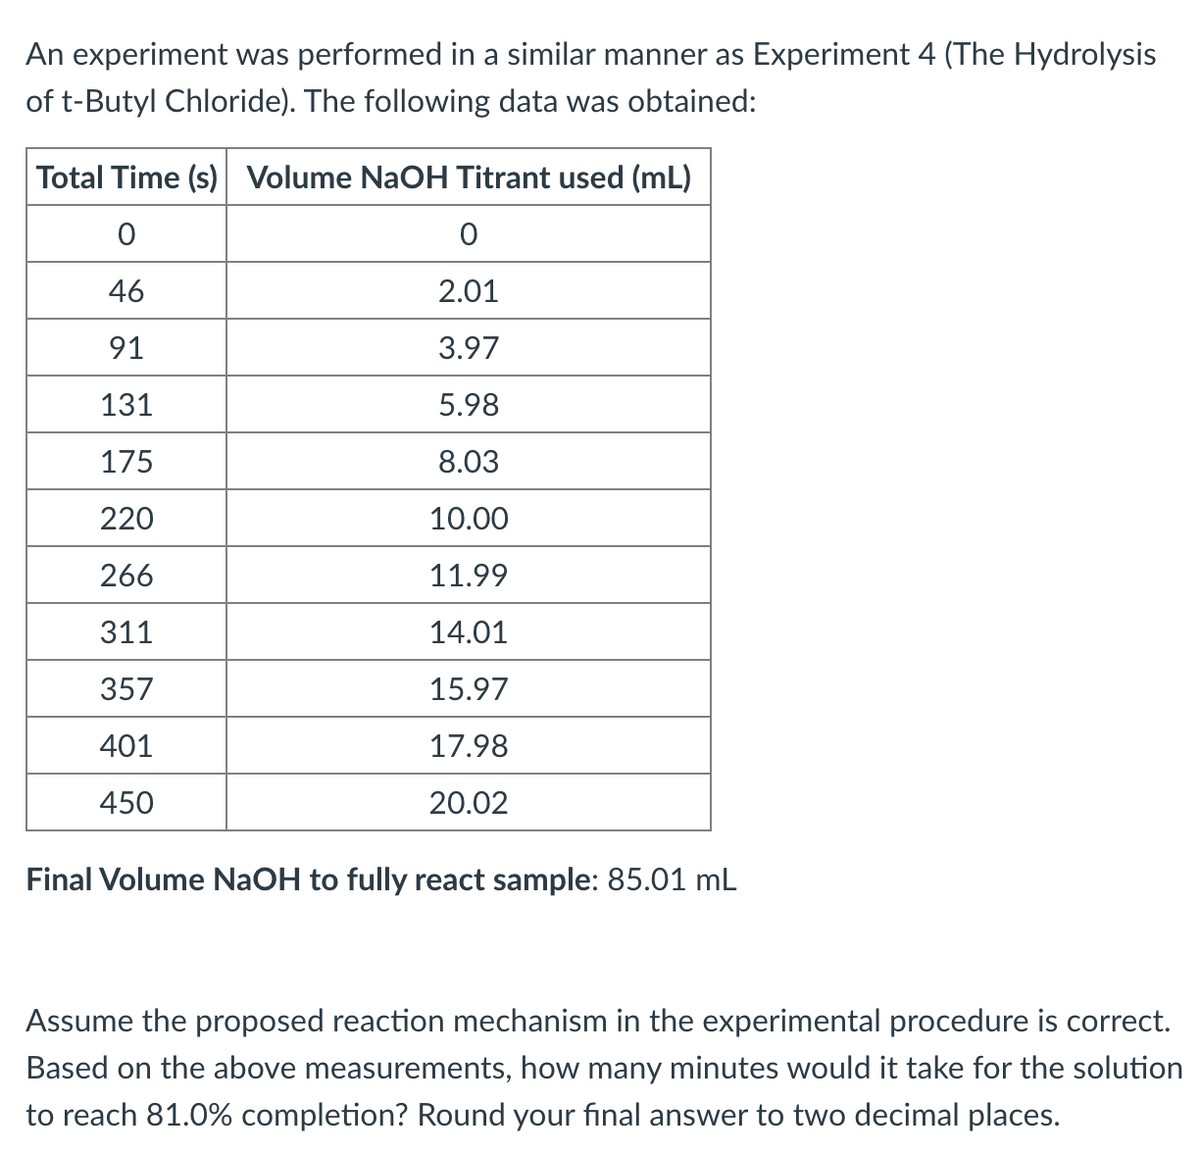 An experiment was performed in a similar manner as Experiment 4 (The Hydrolysis
of t-Butyl Chloride). The following data was obtained:
Total Time (s) Volume NaOH Titrant used (mL)
46
2.01
91
3.97
131
5.98
175
8.03
220
10.00
266
11.99
311
14.01
357
15.97
401
17.98
450
20.02
Final Volume NaOH to fully react sample: 85.01 mL
Assume the proposed reaction mechanism in the experimental procedure is correct.
Based on the above measurements, how many minutes would it take for the solution
to reach 81.0% completion? Round your final answer to two decimal places.
